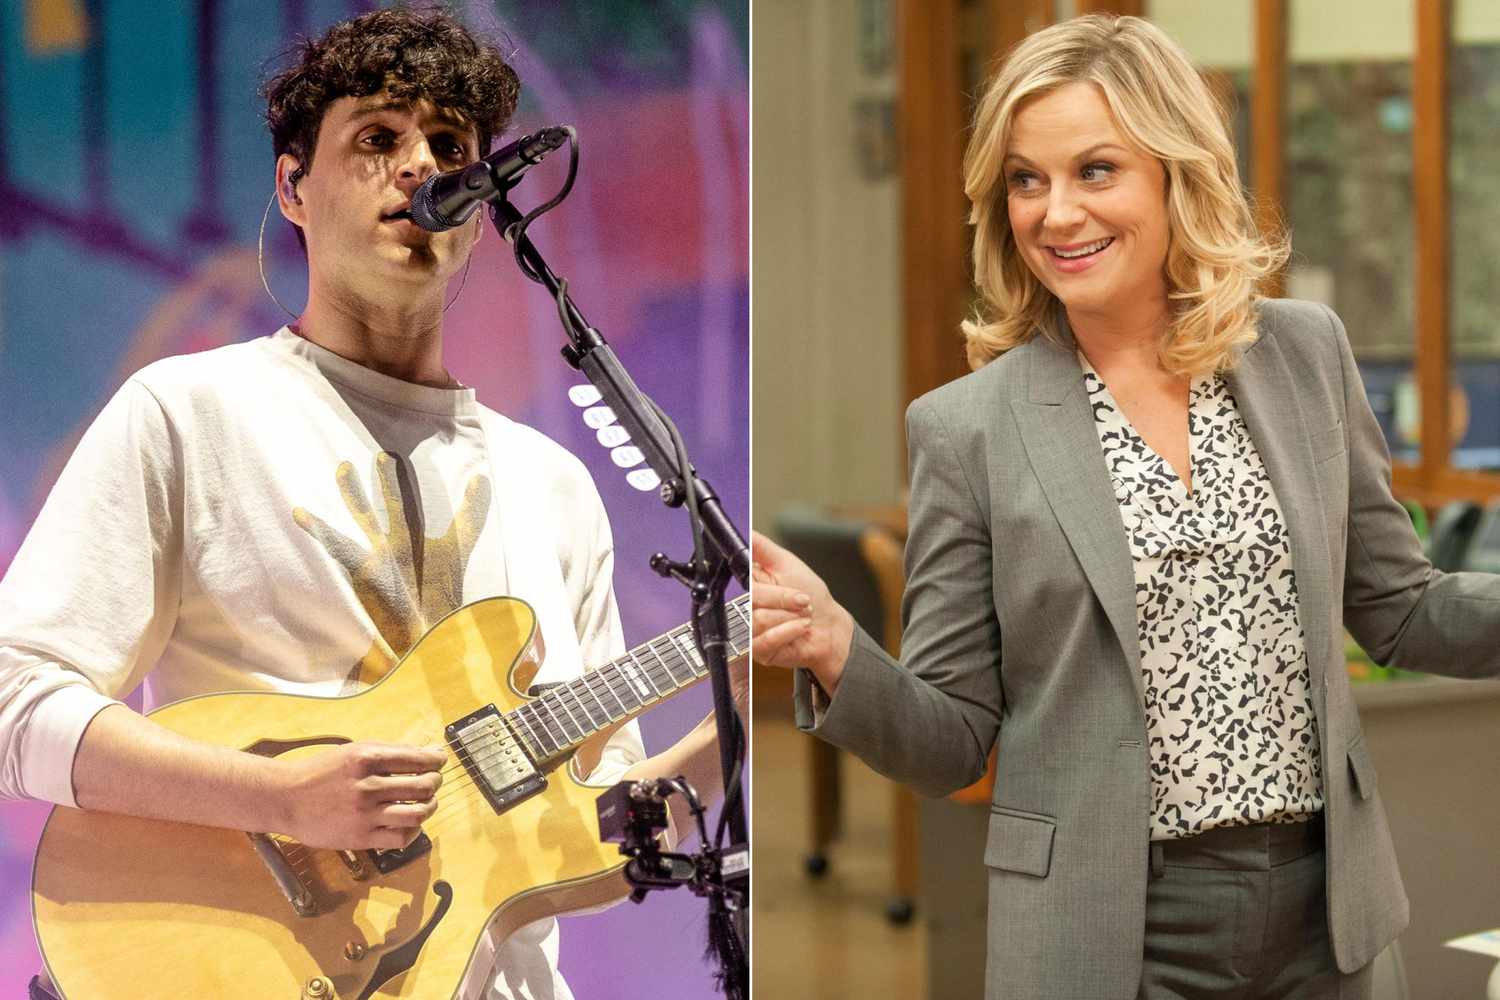 CHICAGO, IL - AUGUST 04: Ezra Koenig of Vampire Weekend performs at Lollapalooza 2018 at Grant Park on August 4, 2018 in Chicago, Illinois. (Photo by Josh Brasted/FilmMagic) PARKS AND RECREATION -- "Galentine's Day" Episode 617 -- Pictured: Amy Poehler as Leslie Knope -- (Photo by: Colleen Hayes/NBC/NBCU Photo Bank via Getty Images)